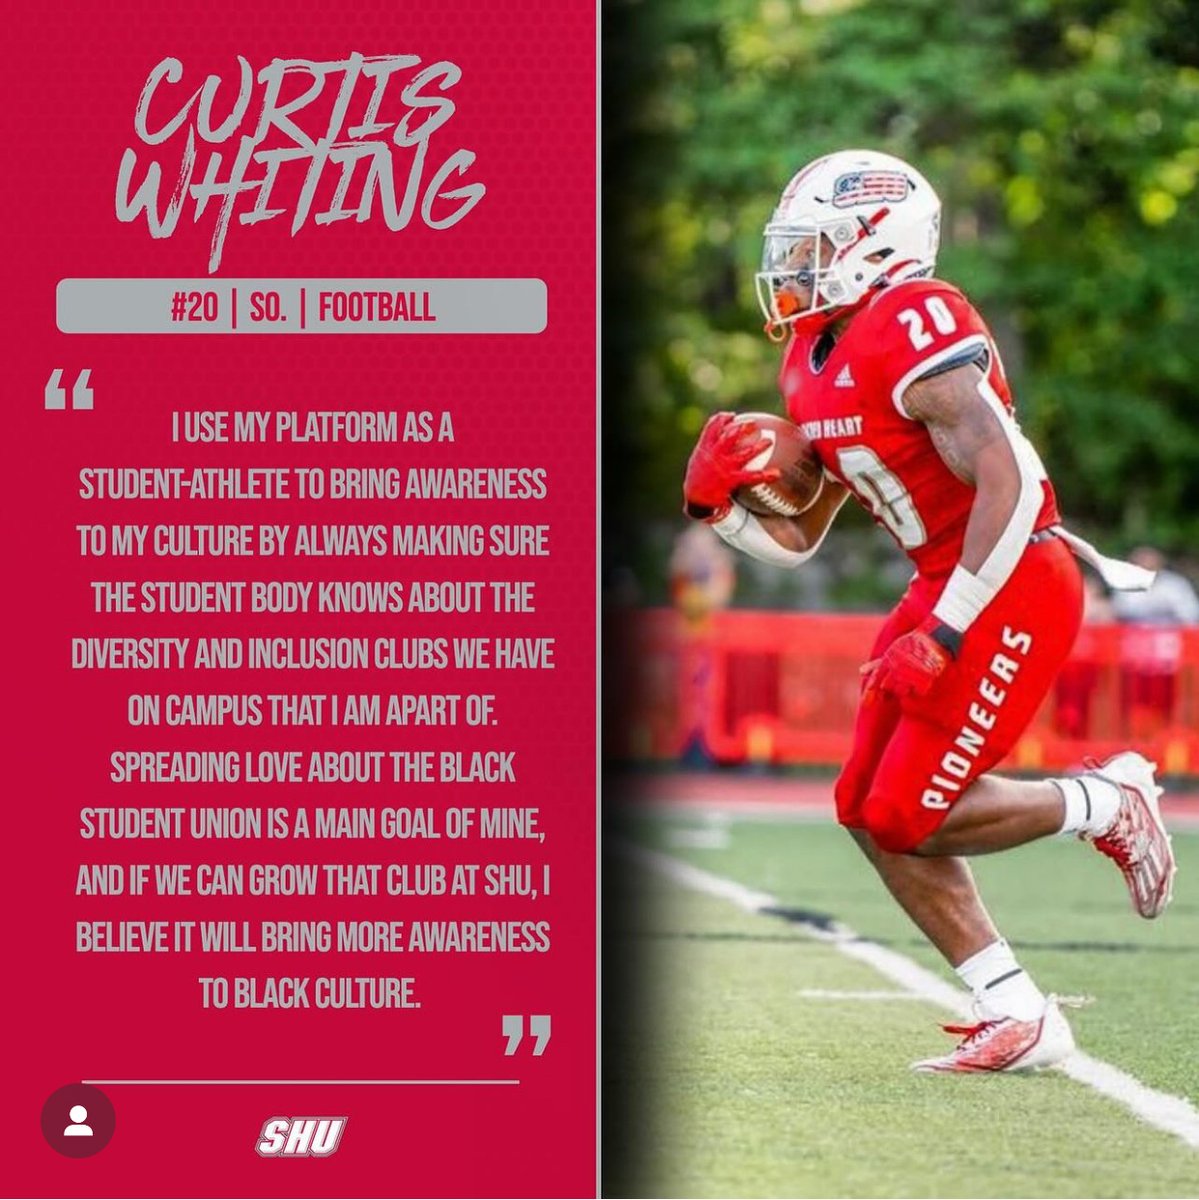 Celebrating Black History Month!! Today we highlight Curtis Whiting, who shares how he uses his platform as a student-athlete to bring awareness to his culture. #WeAreSHU #BHM